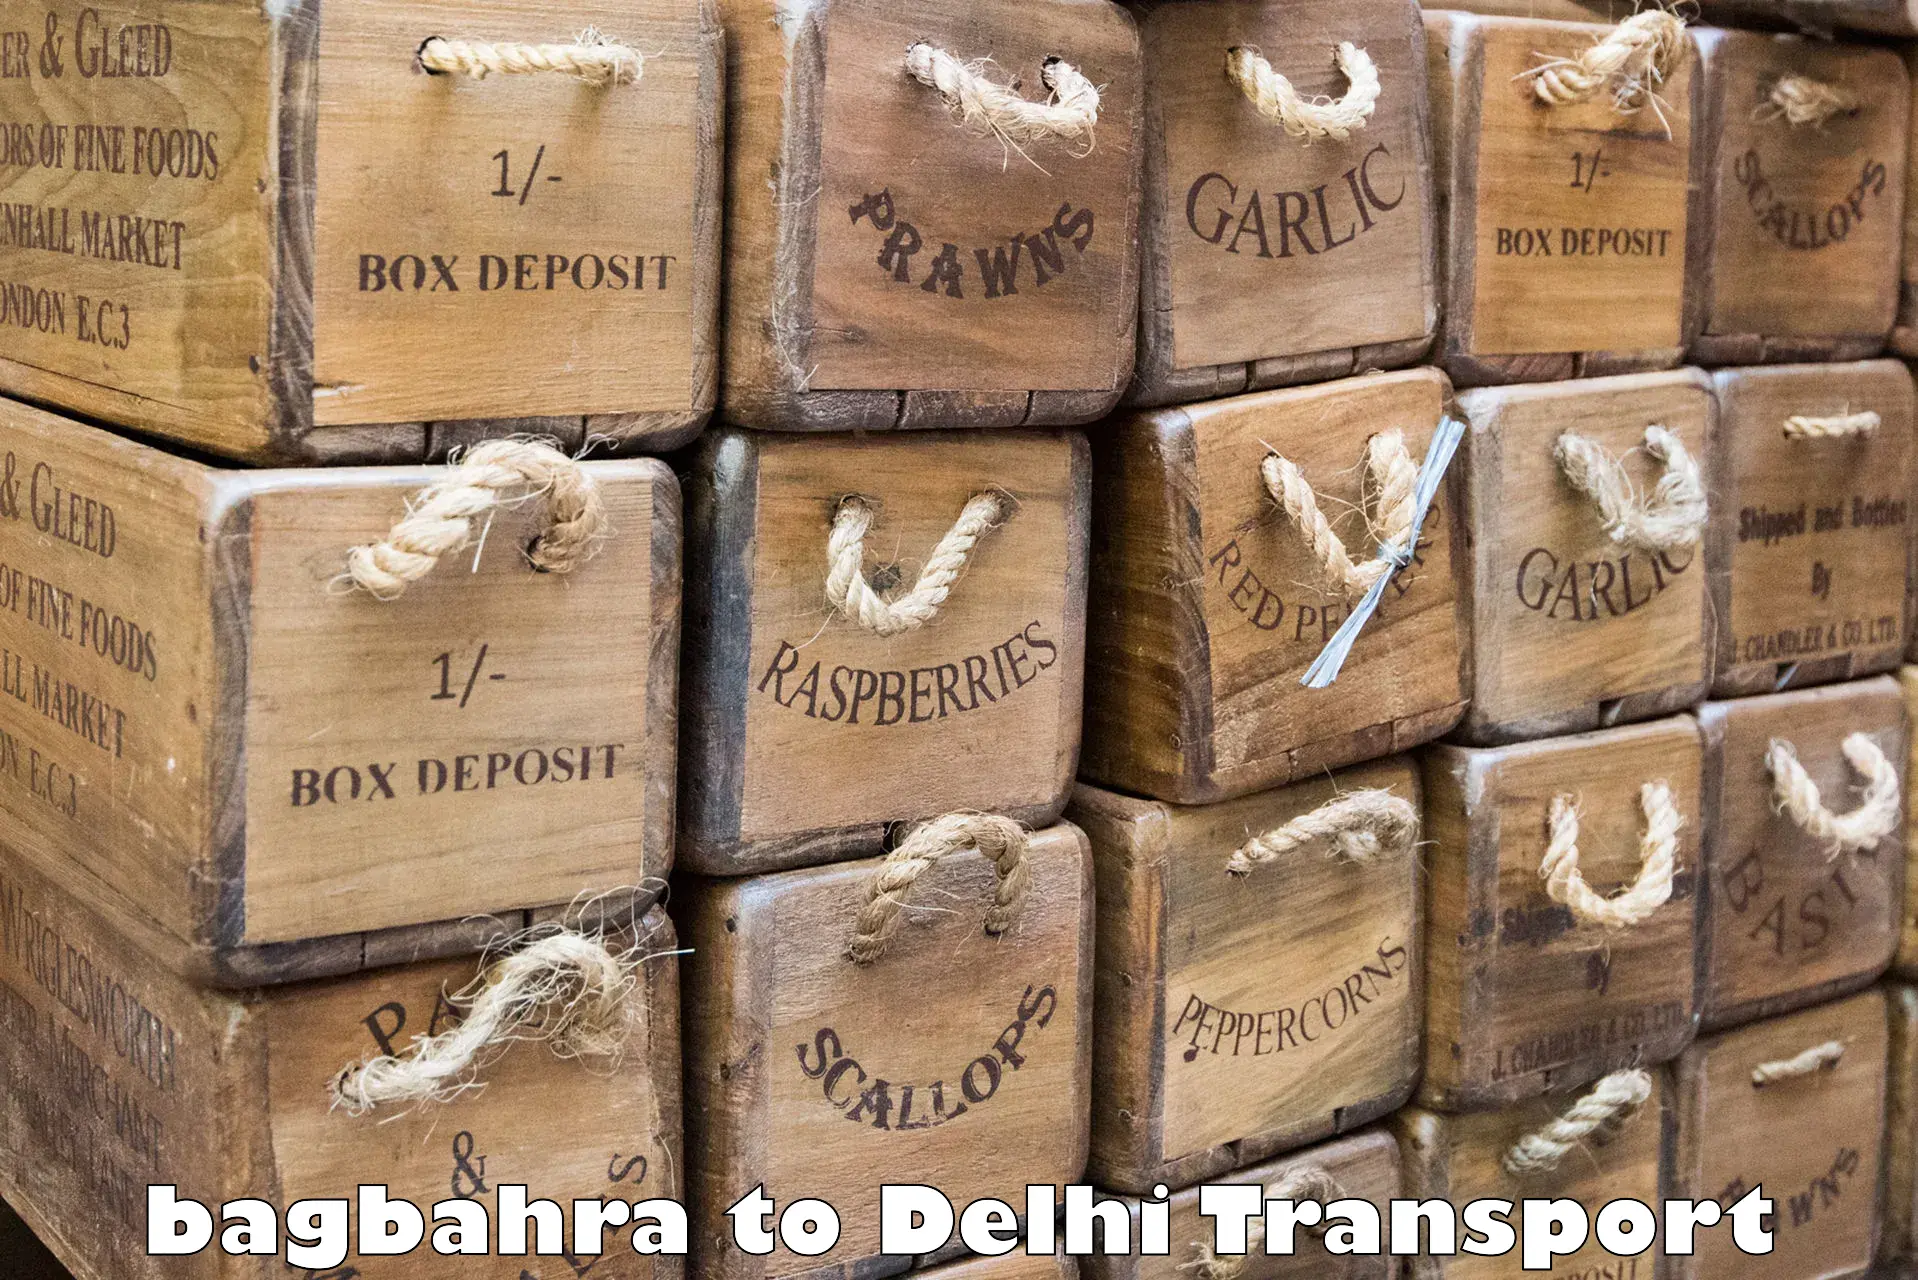 Transport bike from one state to another bagbahra to Sarojini Nagar